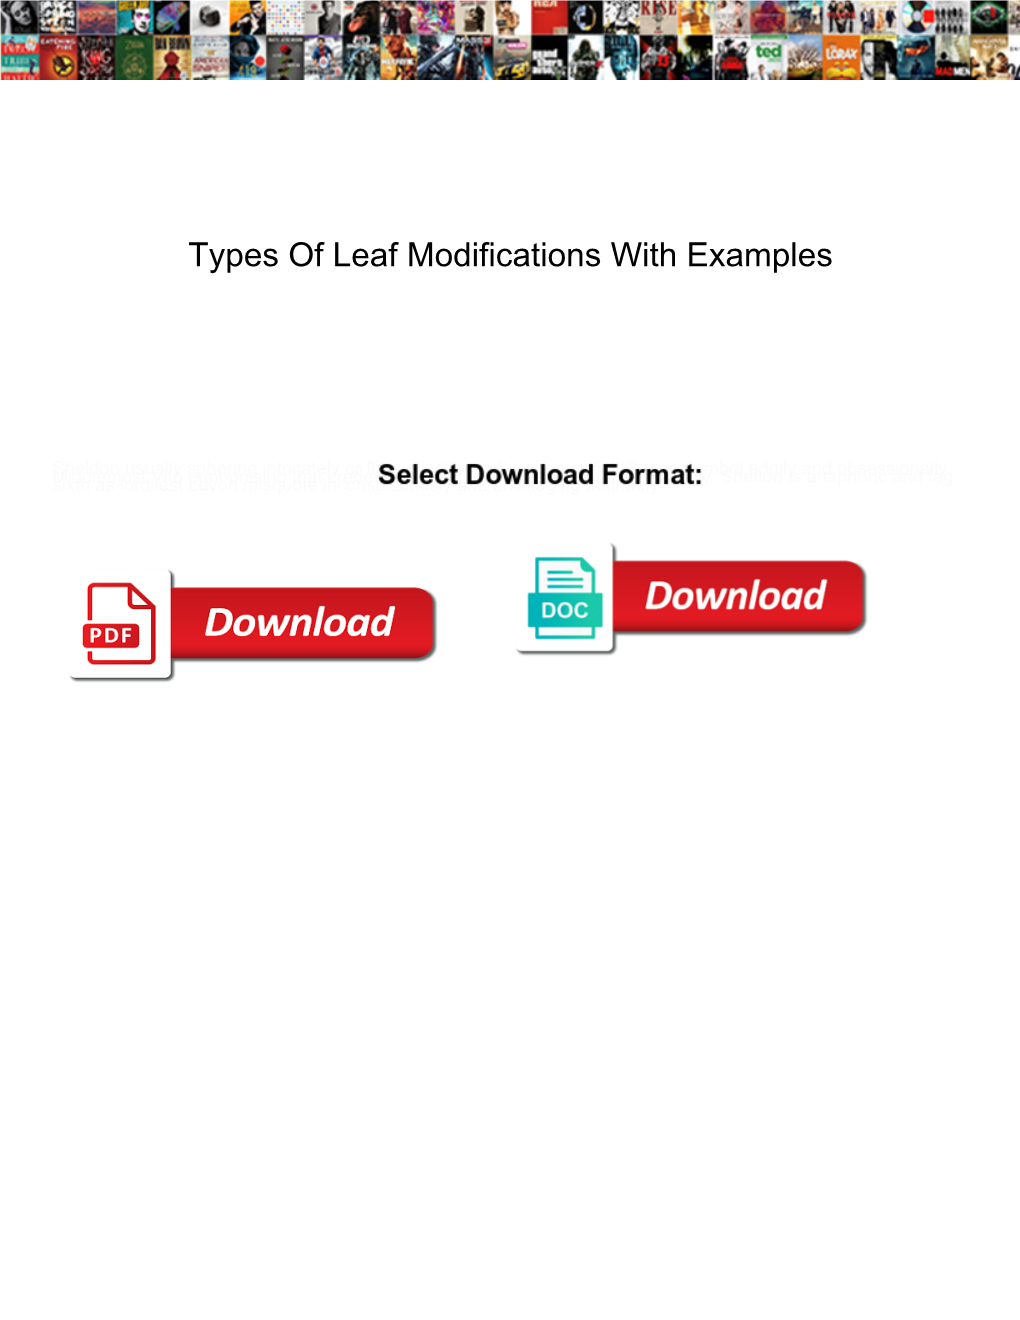 Types of Leaf Modifications with Examples